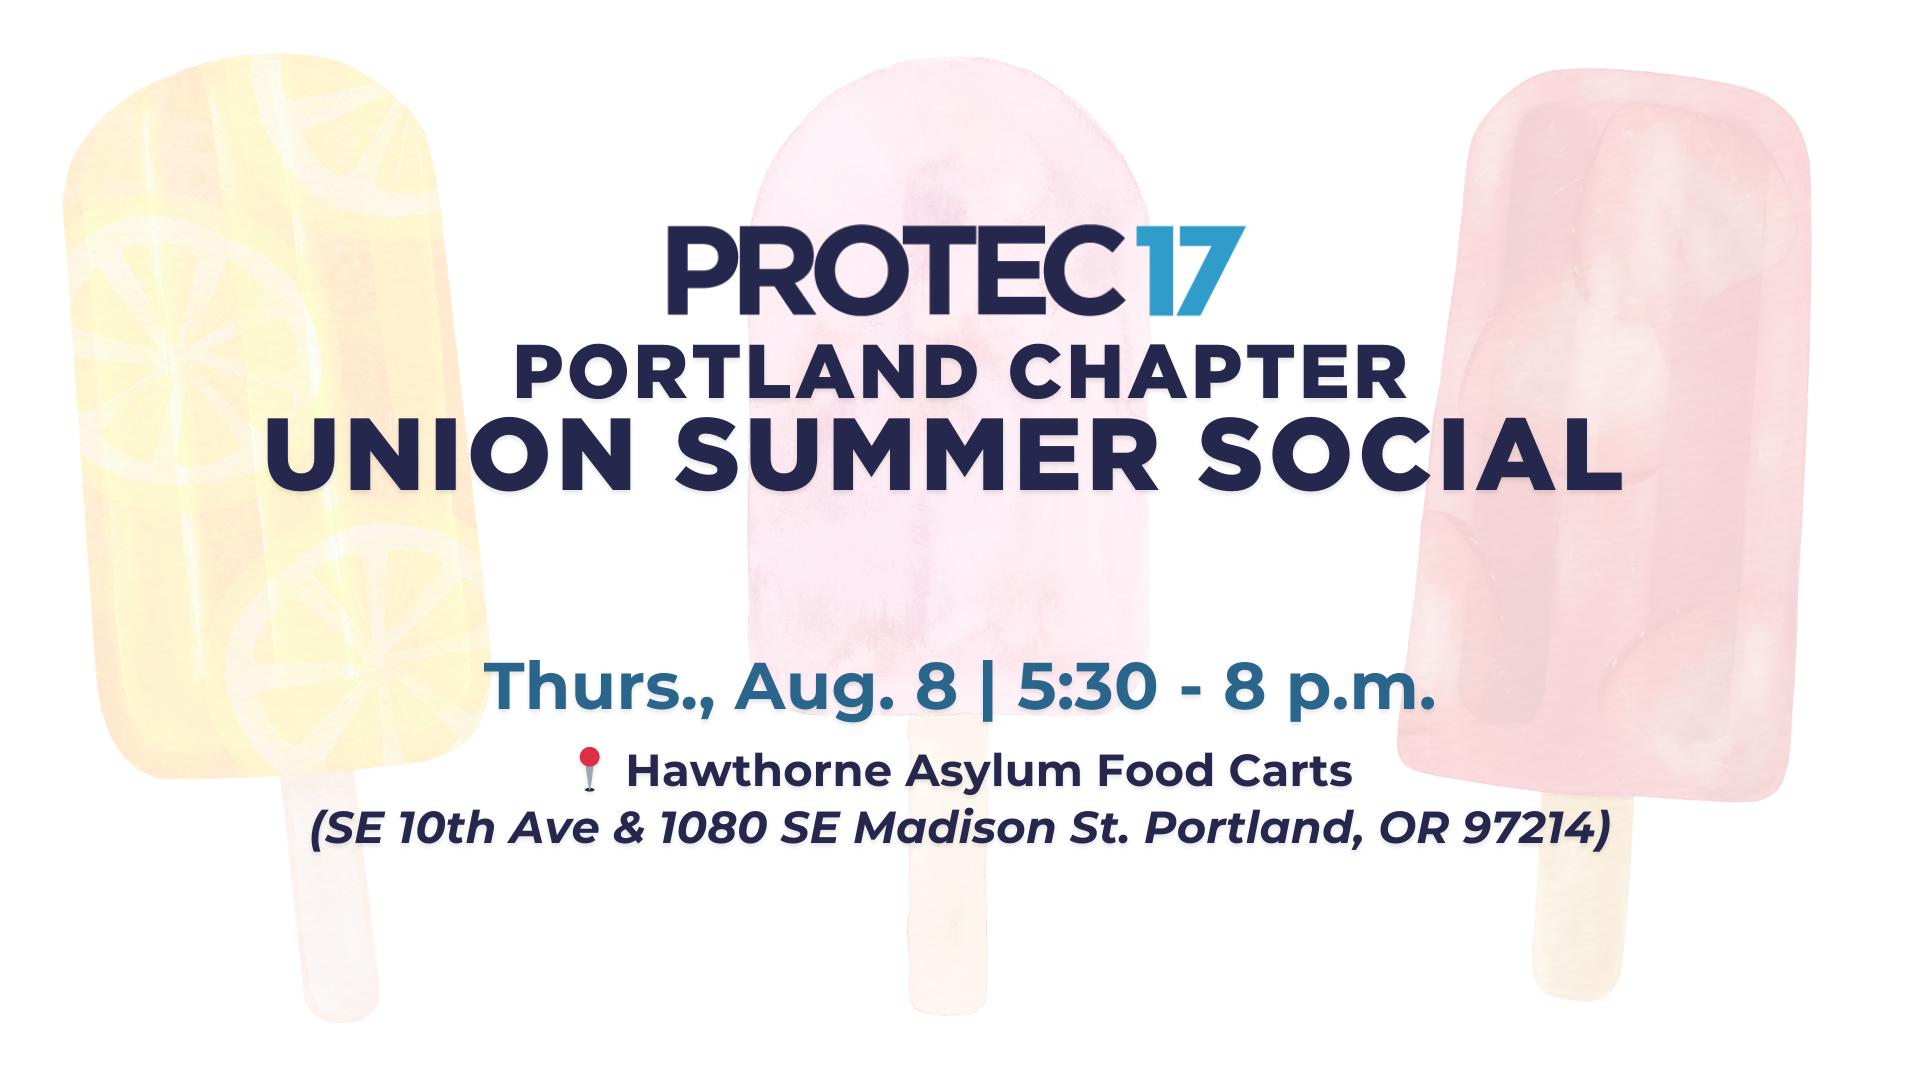 UNION SUMMER SOCIAL | Thurs., Aug. 8 | 5:30-8 p.m. | Hawthorne Asylum Food Carts (SE 10th Ave & 1080 SE Madison St. Portland, OR 97214" There are colorful, faded graphics of different types of popsicles in the background.